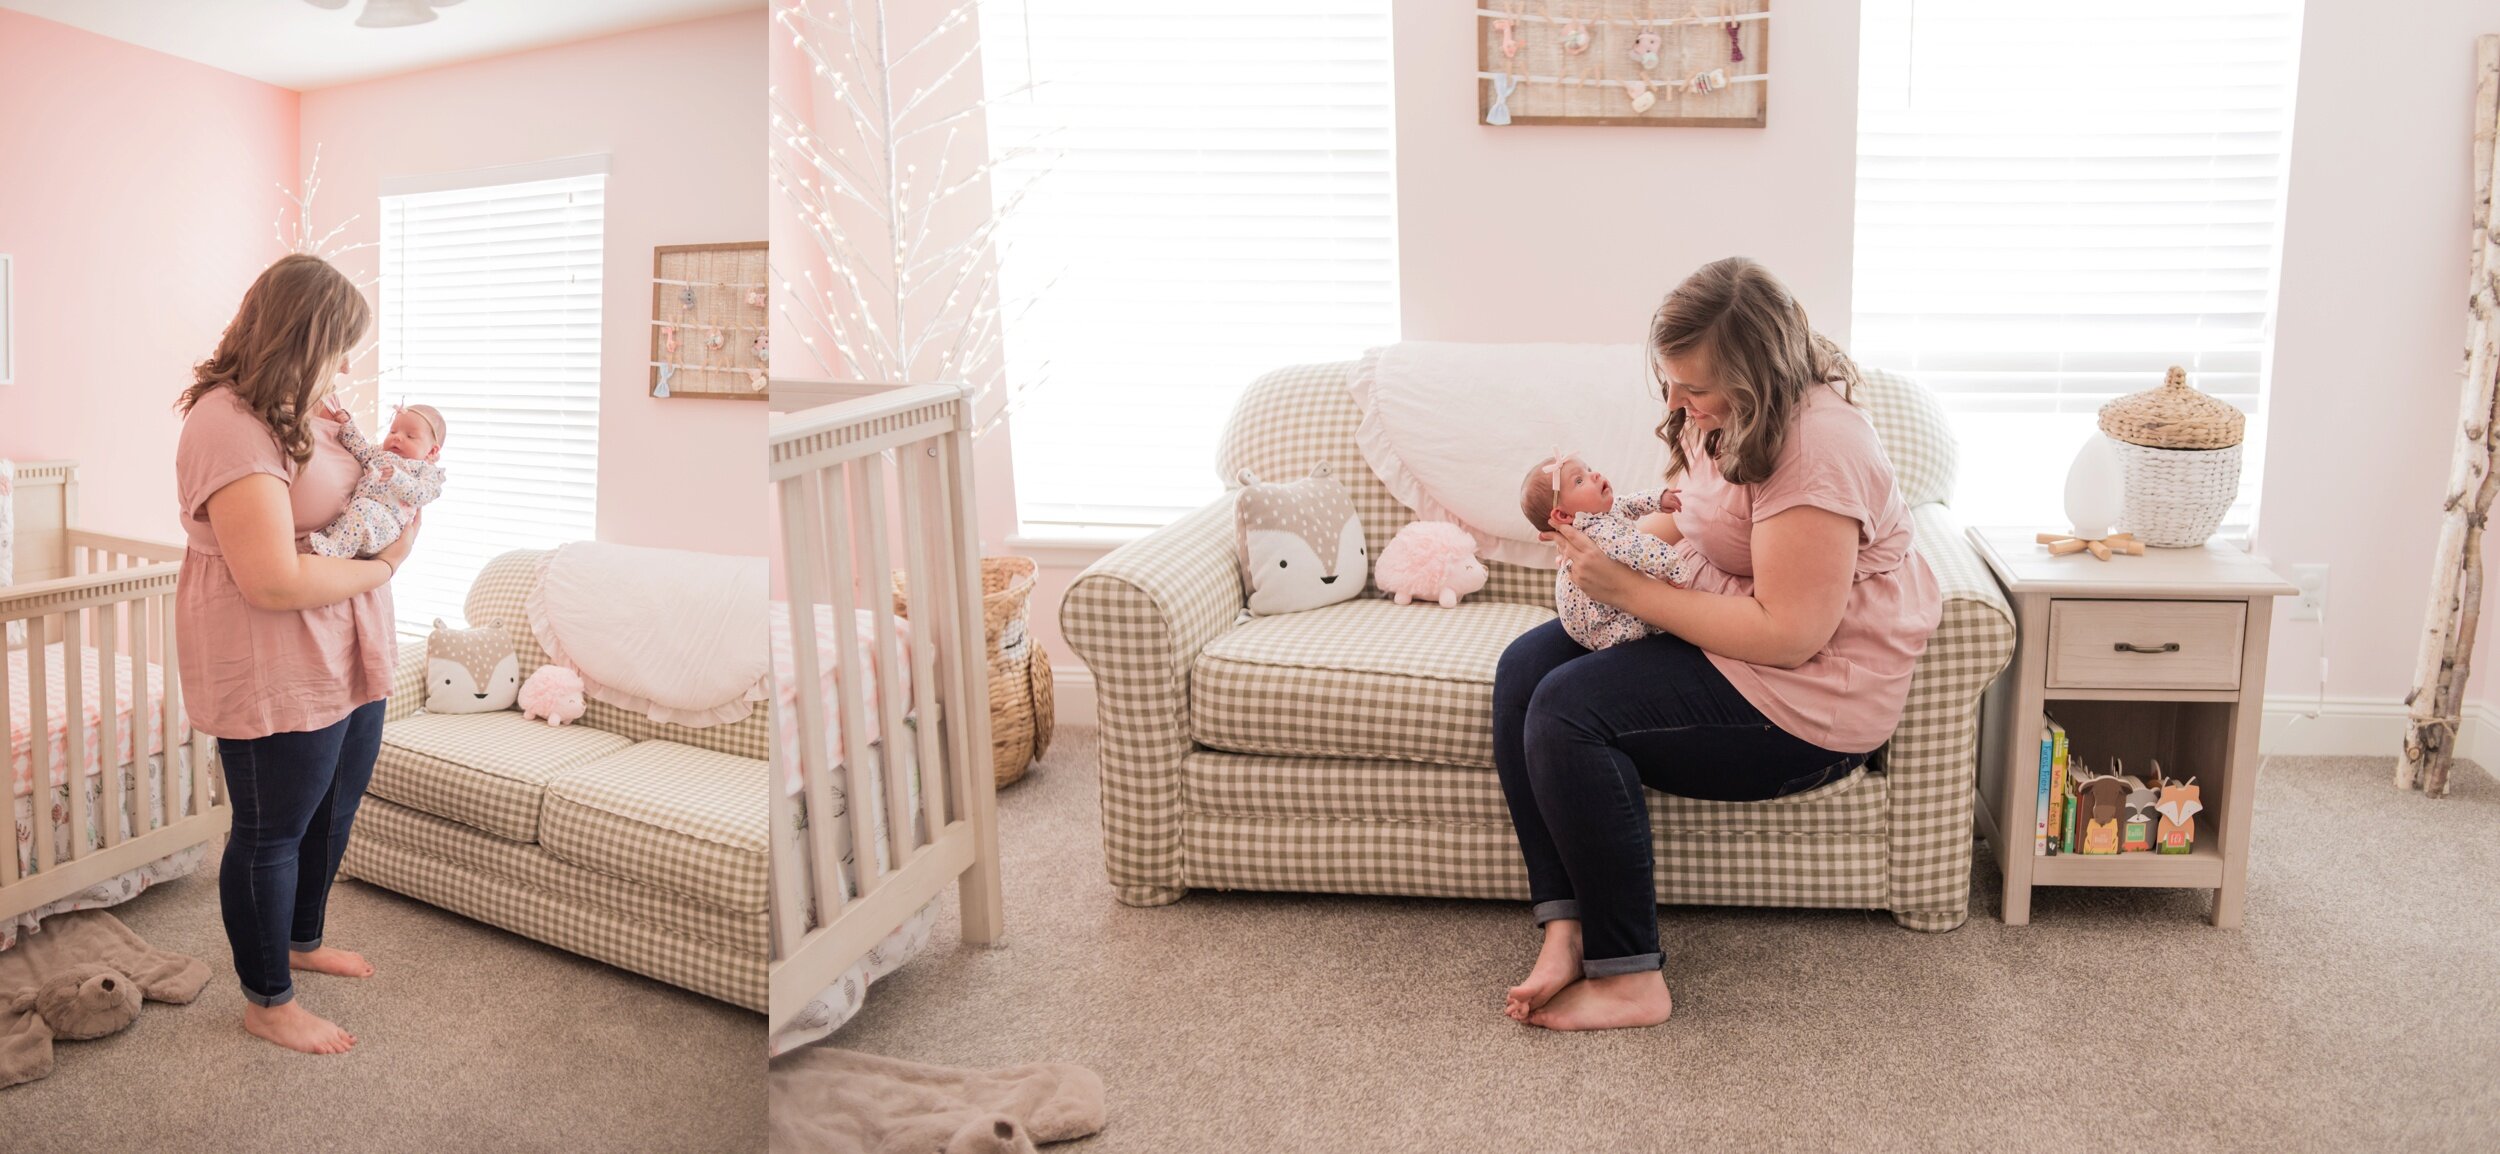 Lifestyle Newborn Photography in Lees Summit by Merry Ohler 14